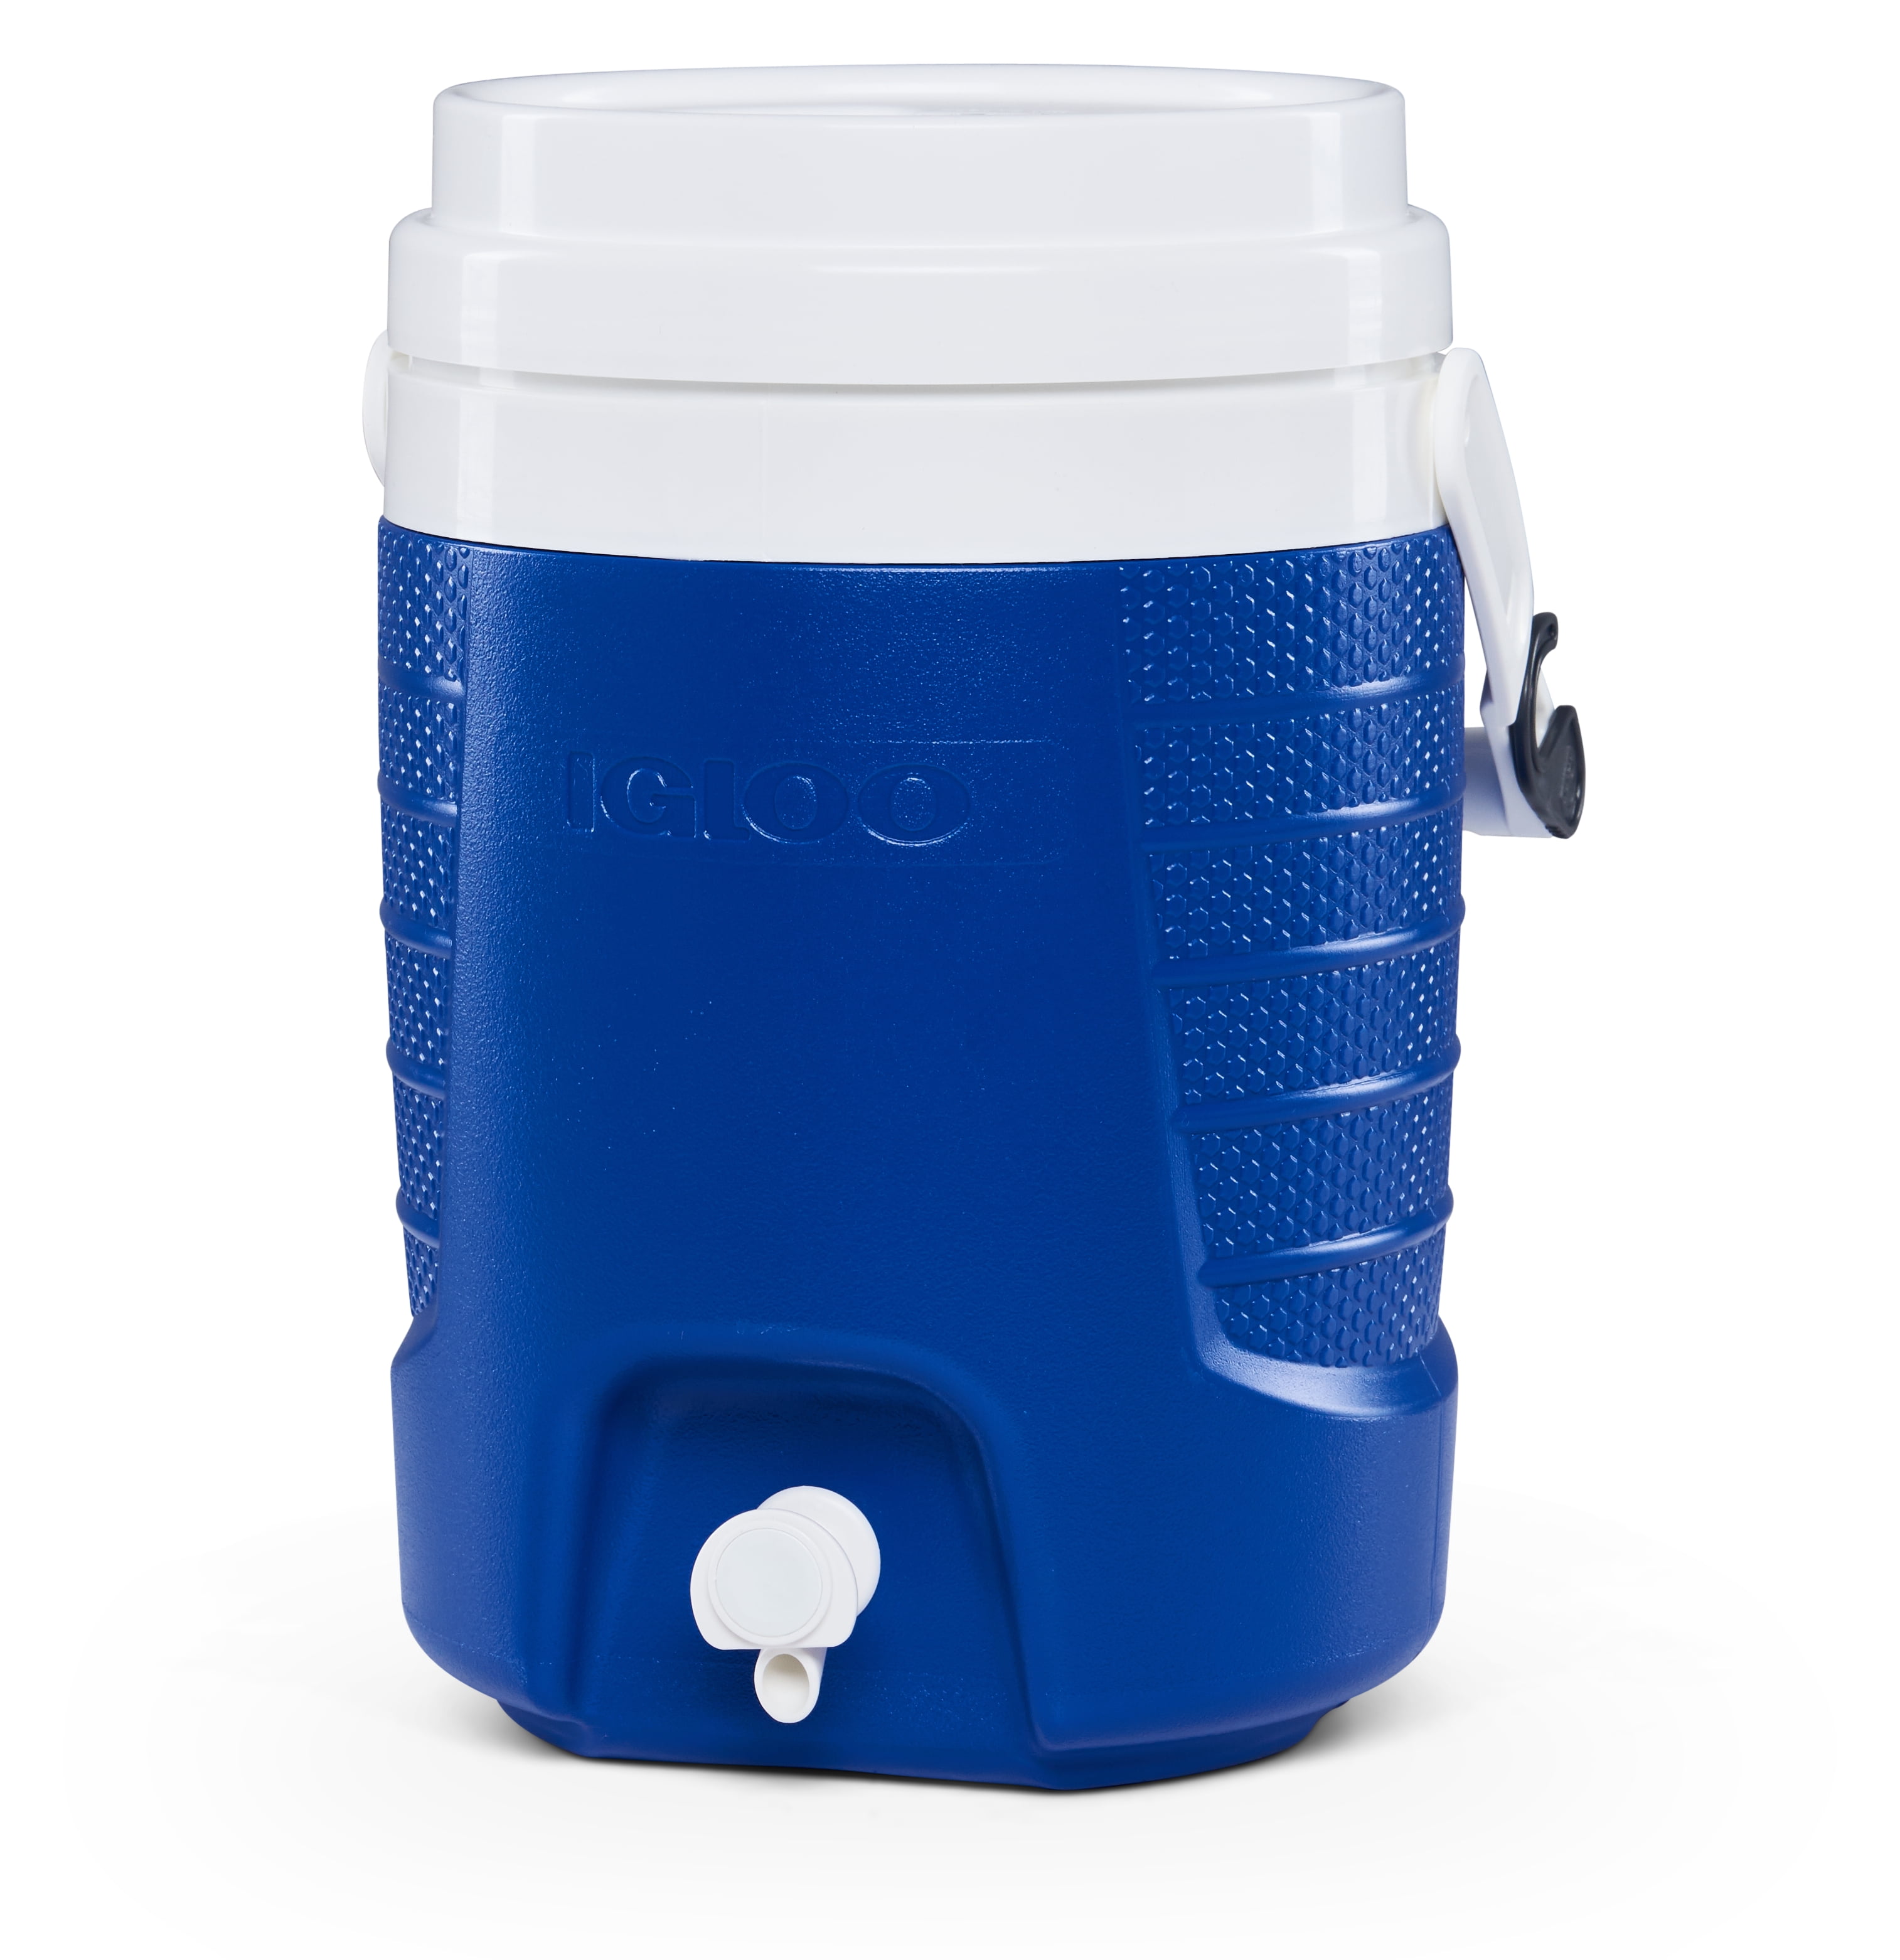 Blue Igloo 5 Gallon Wheeled Portable Sports Cooler Water Beverage Dispenser with Flat Seat Lid Pack of 2